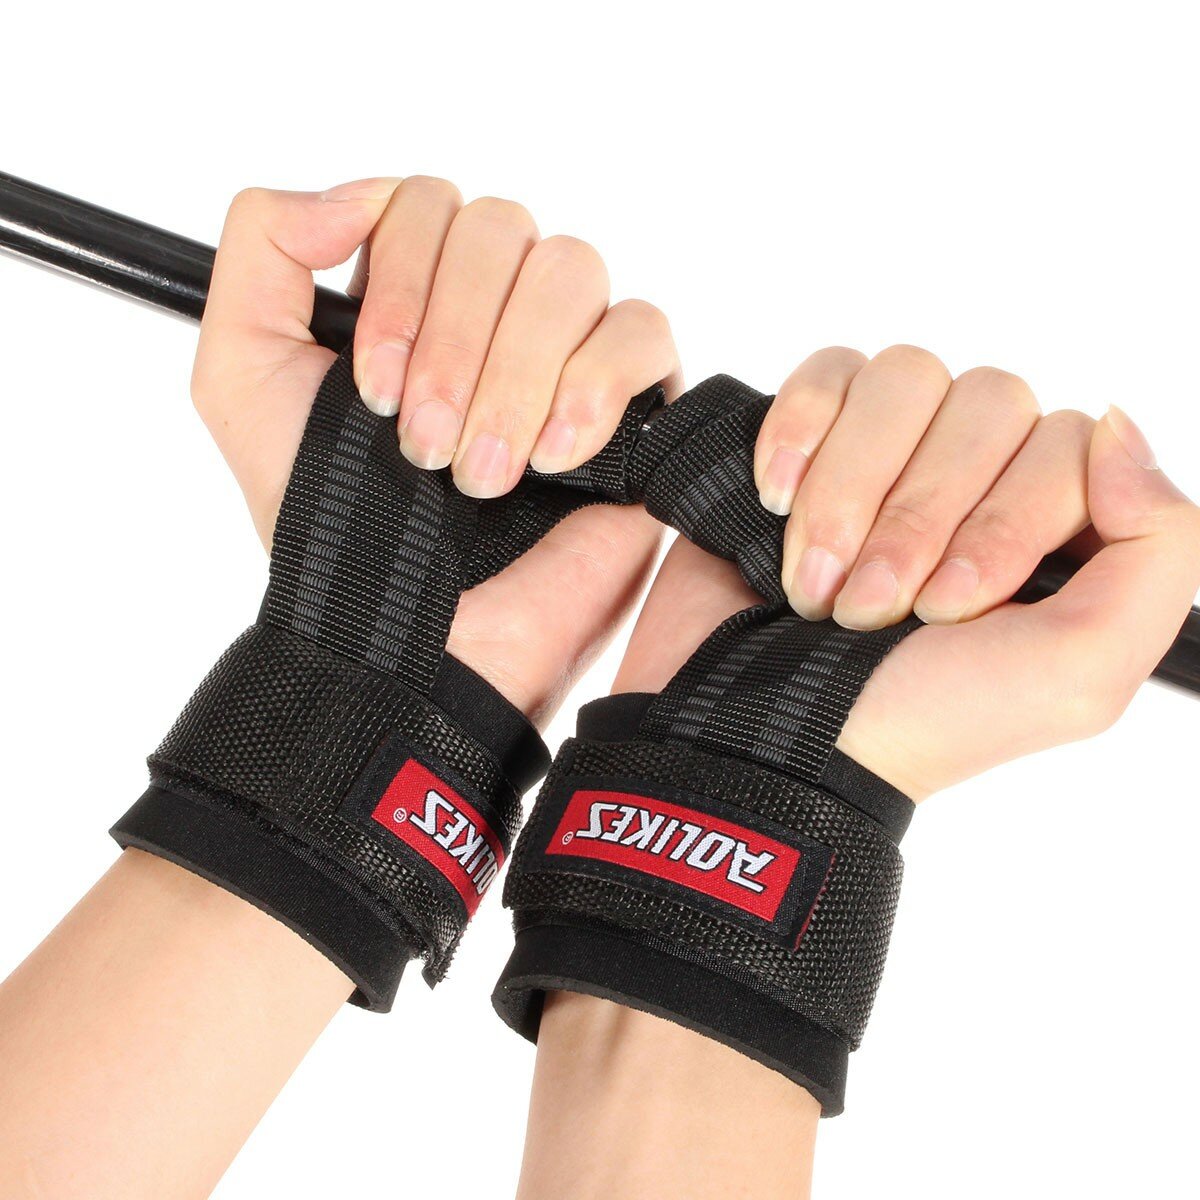 Weight Lifting Hand Grips Straps Wrist Protector Gym Training Wraps Gloves LJ